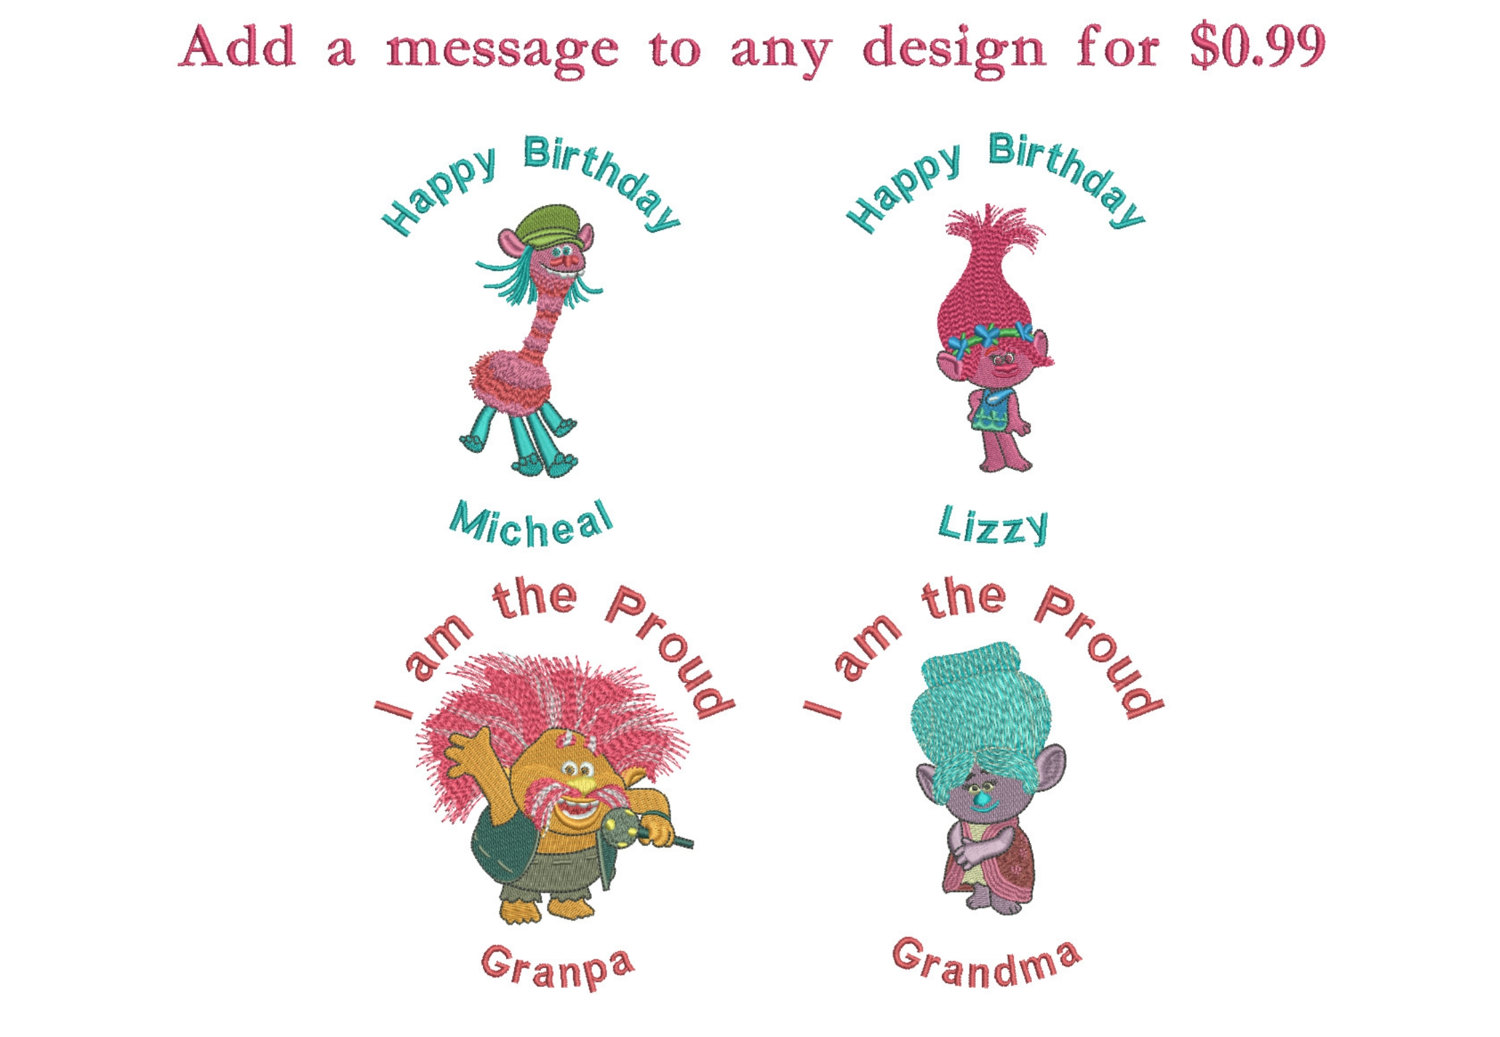 75% off - Movie Trolls machine embroidery designs for 4x4in hoop - 22 characters - resizeable with a freely downloadable utility.